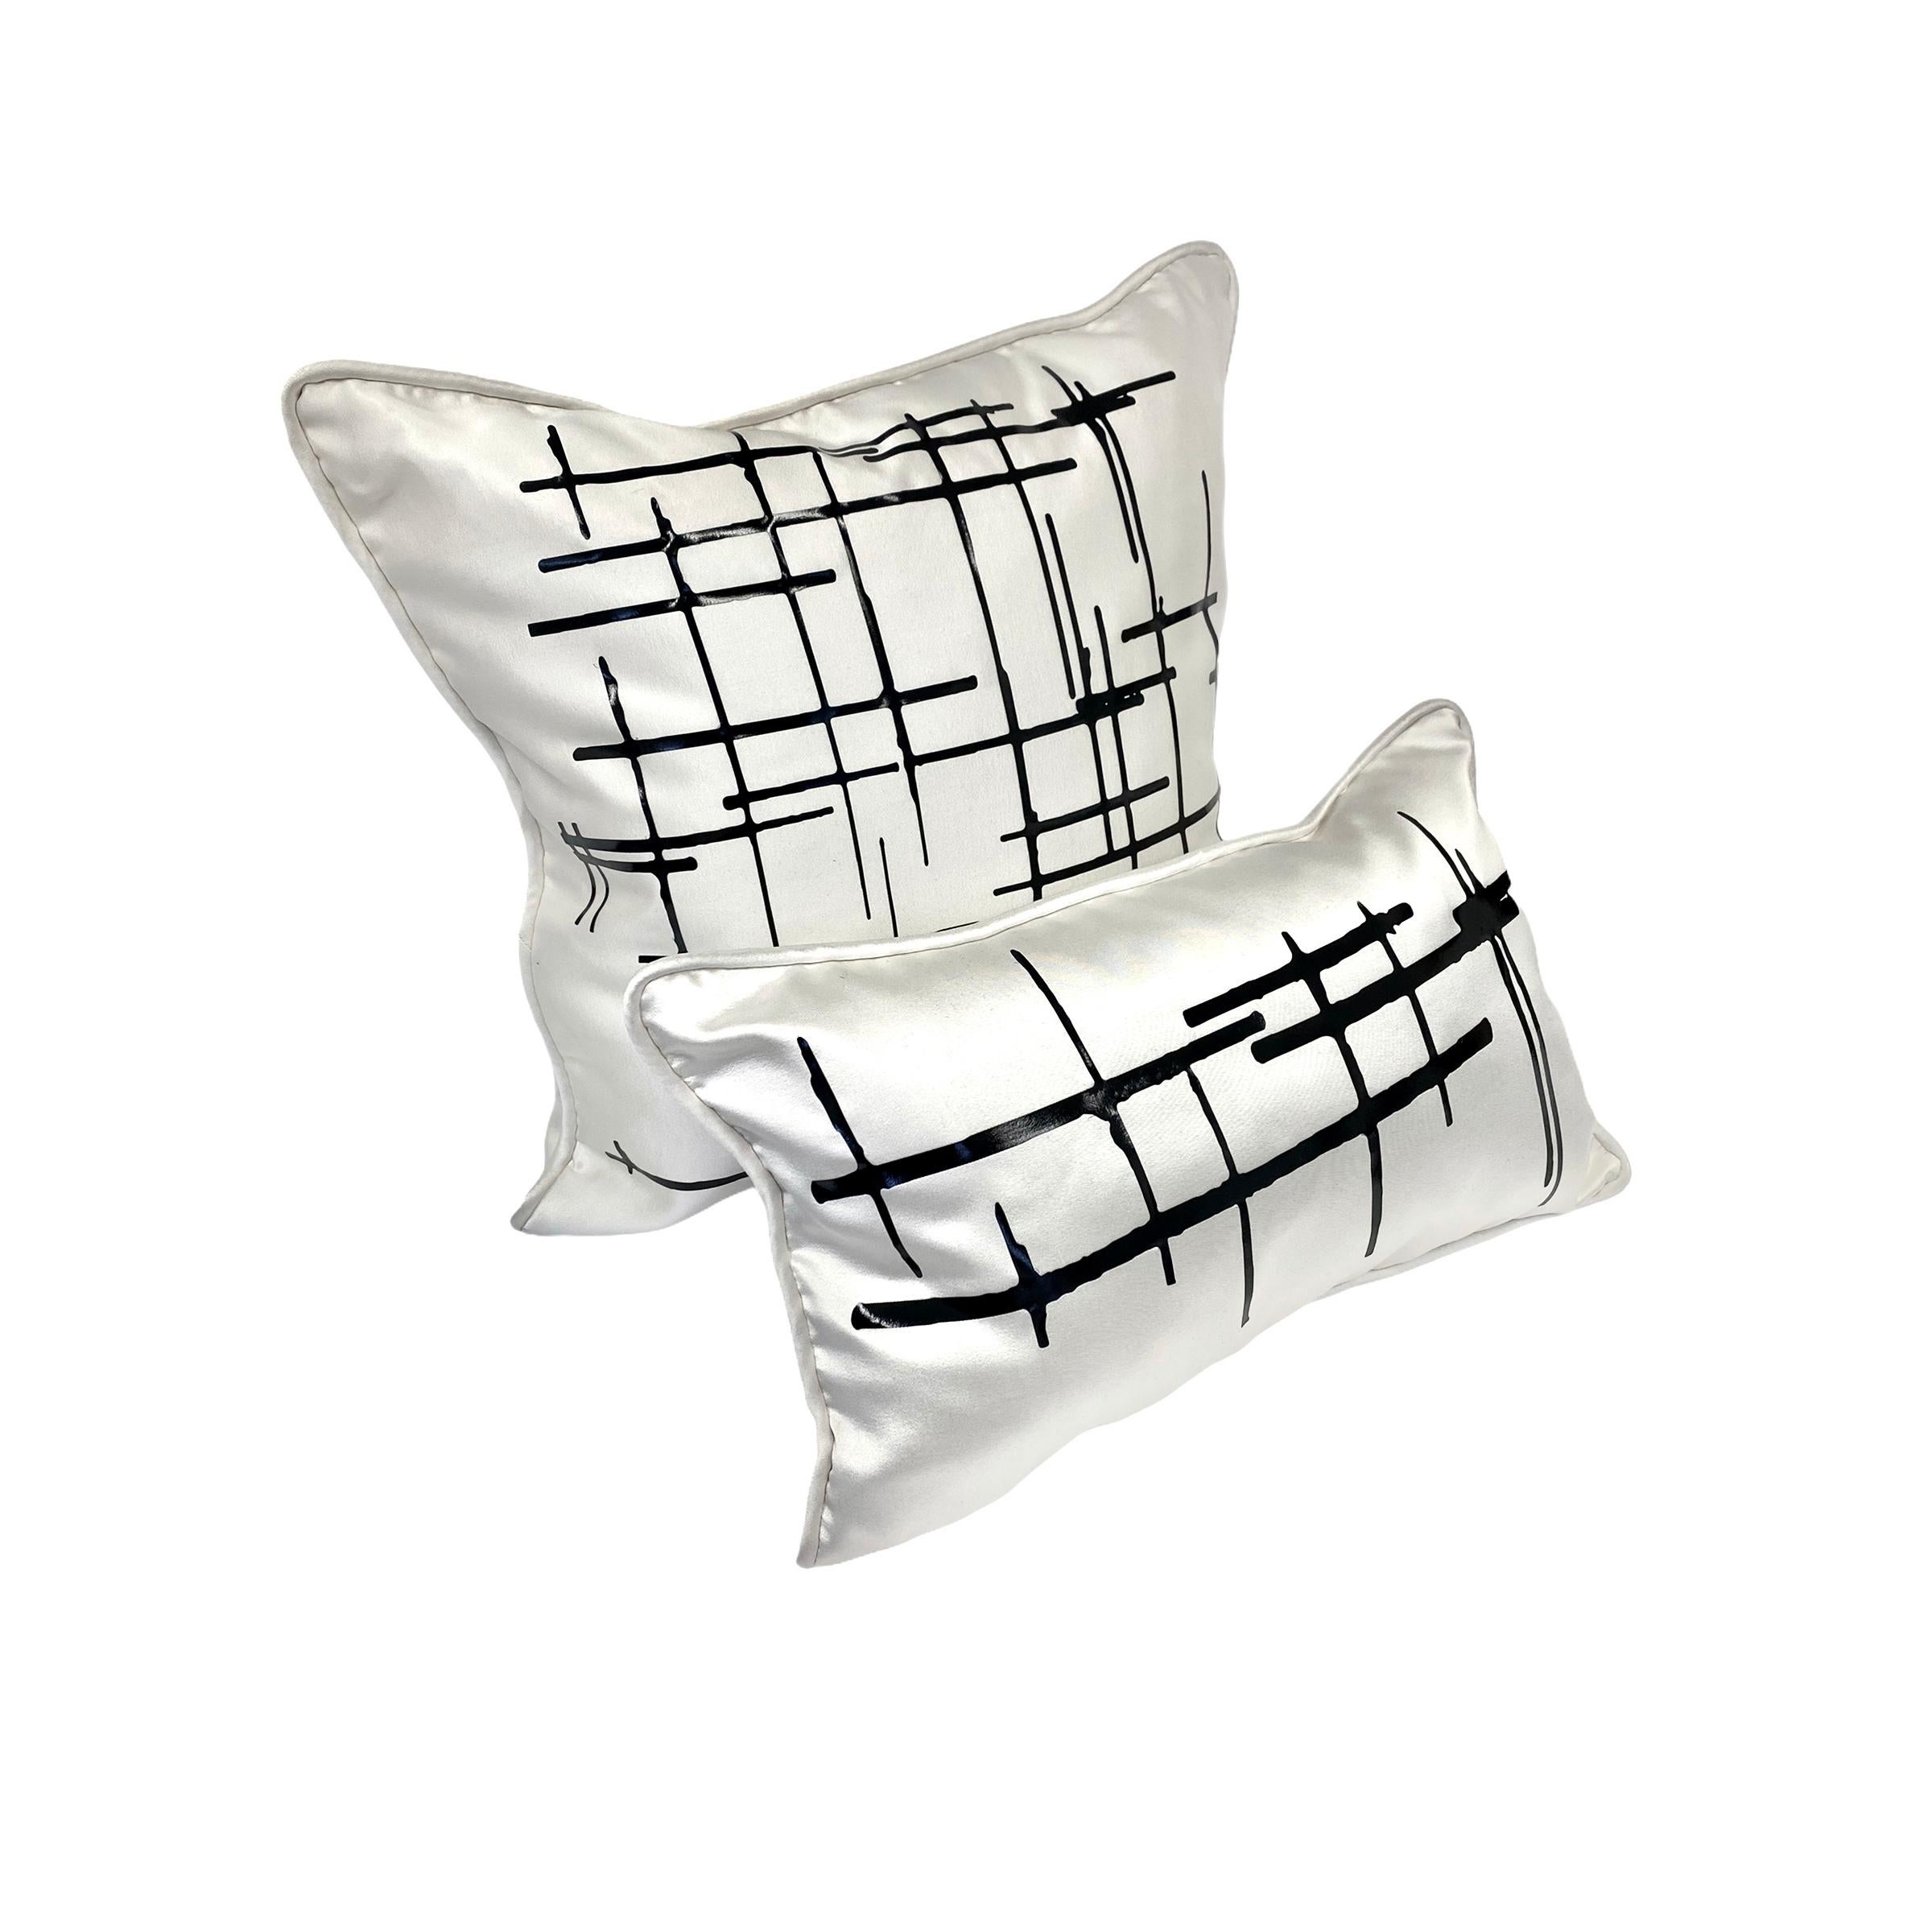 Authentic Italian silk wool in off-white. The luxury fabric is a blend of Italian virgin wool and silk, which makes for greater durability. This gives a perfect softness and sheen to the pillows, complementing any interior decor. The wool